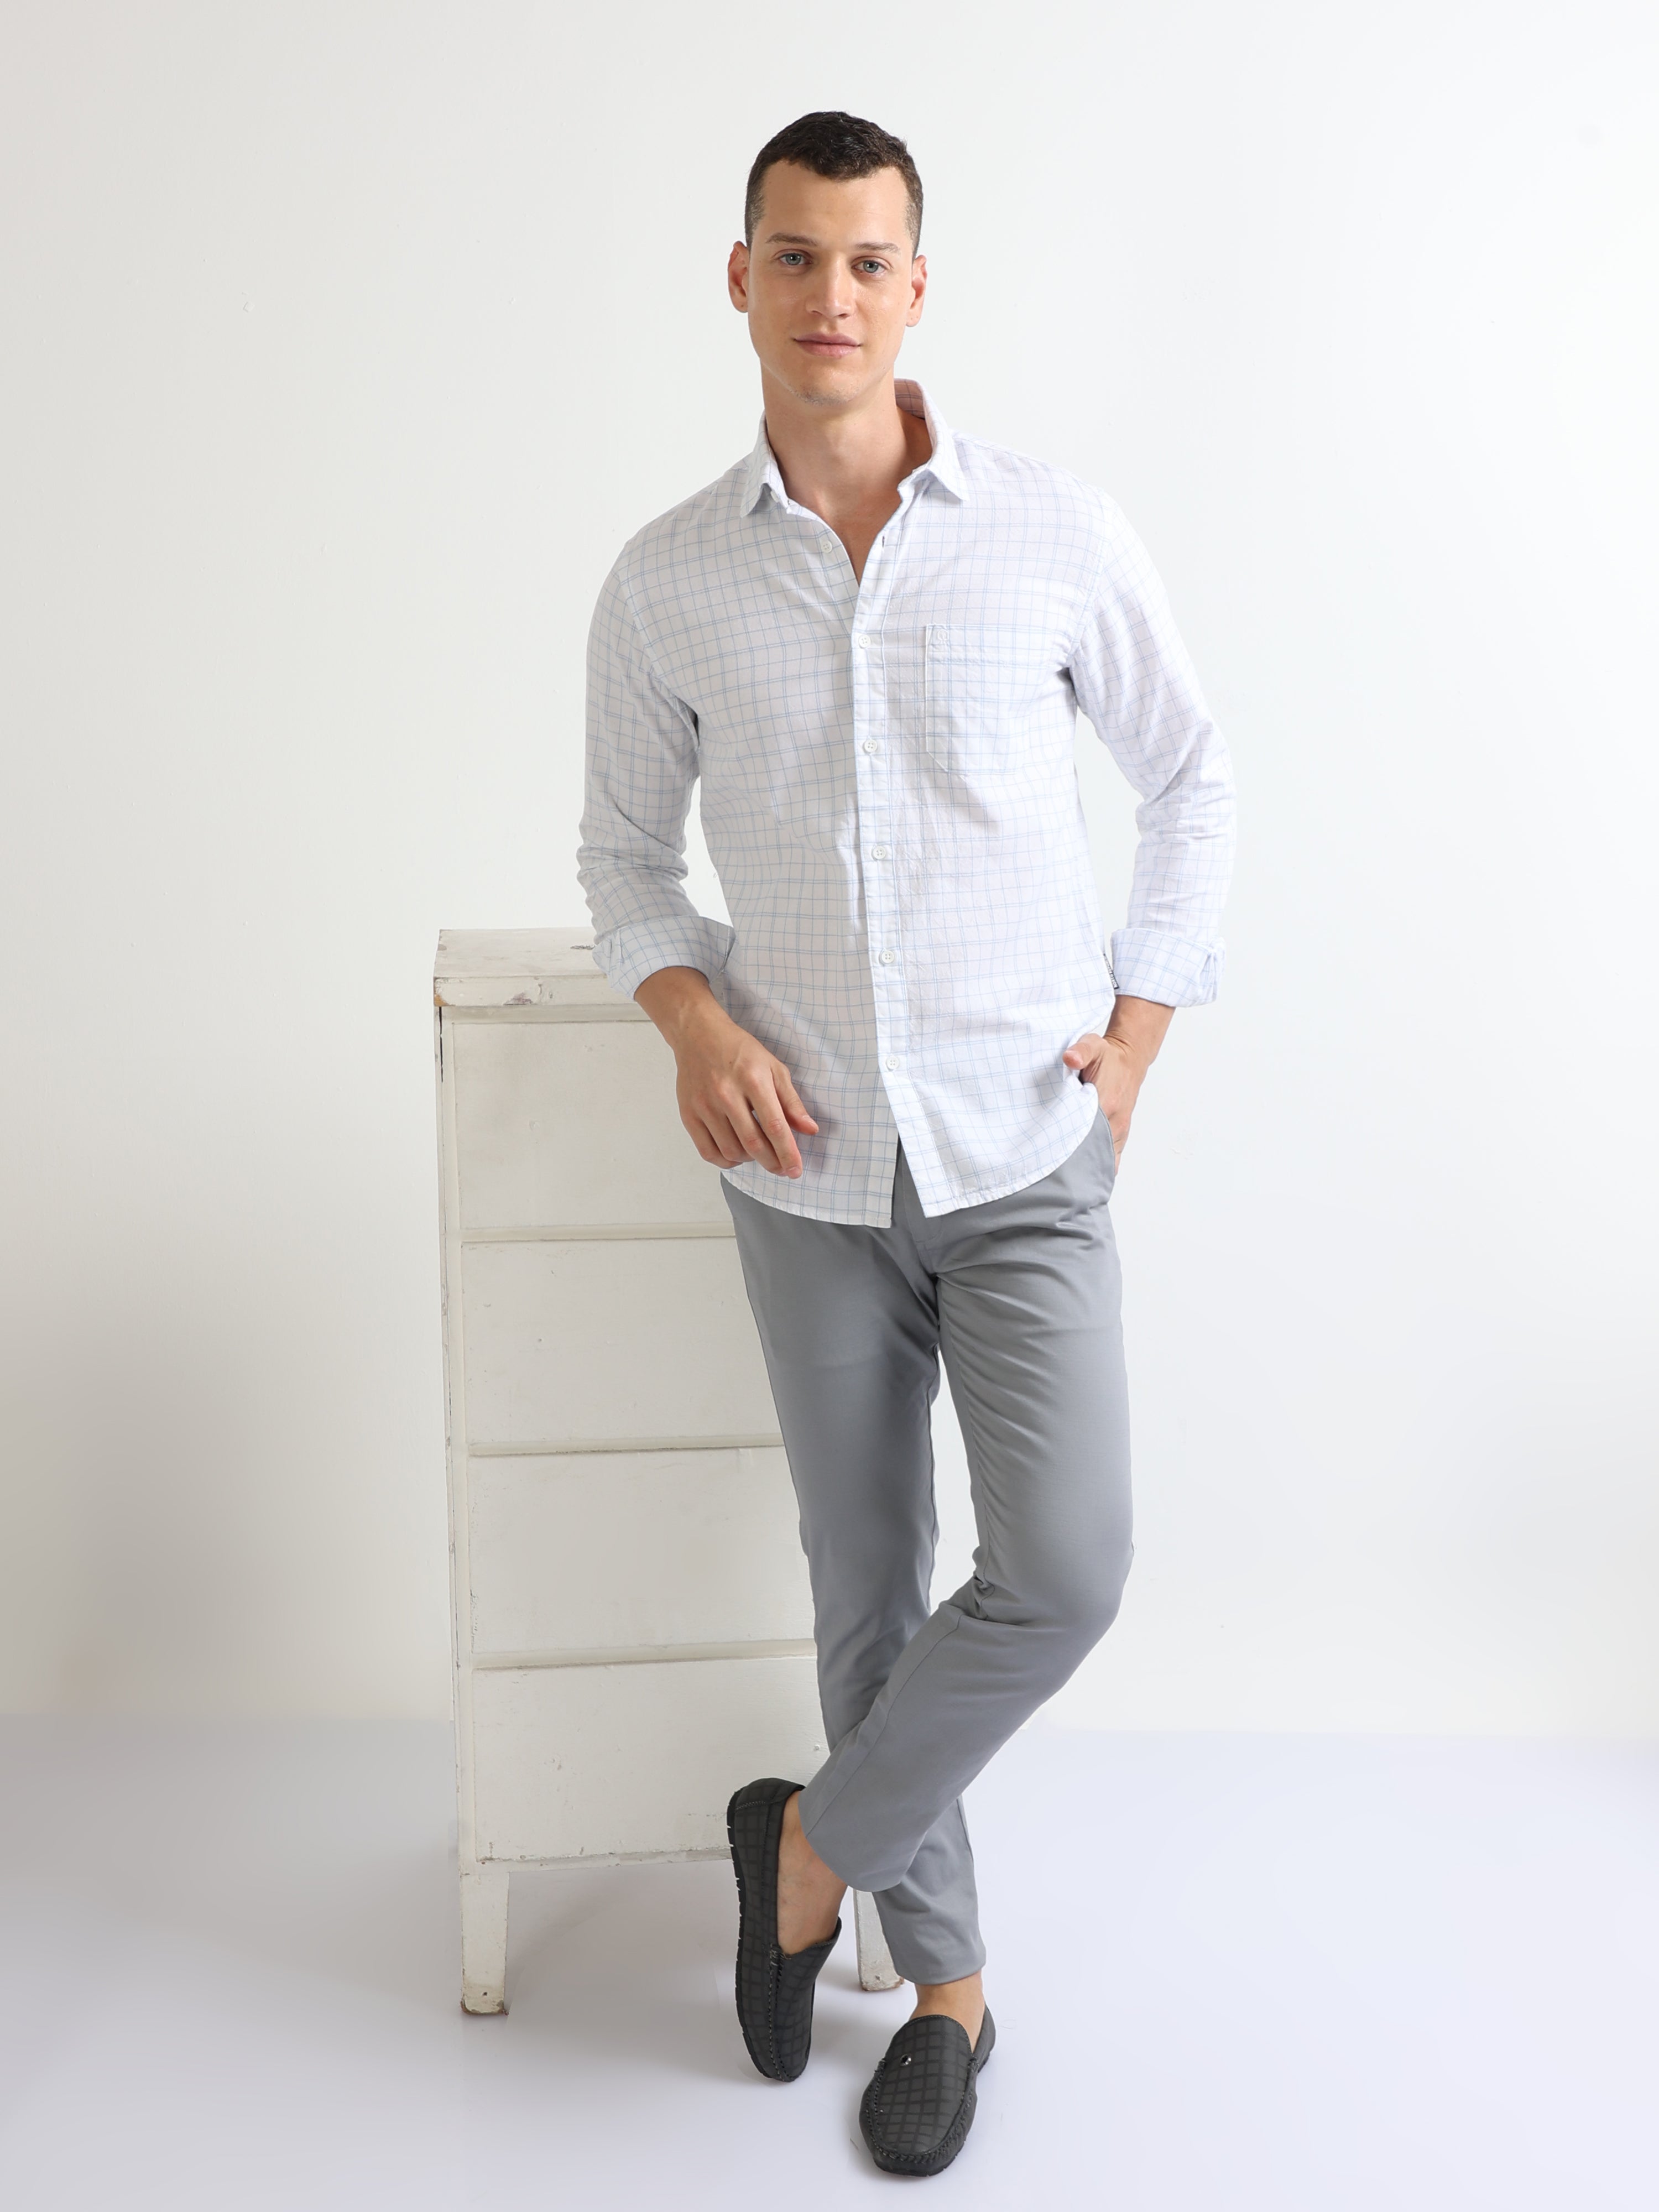 Chambray and White for Fall - C'est Bien by Heather Bien